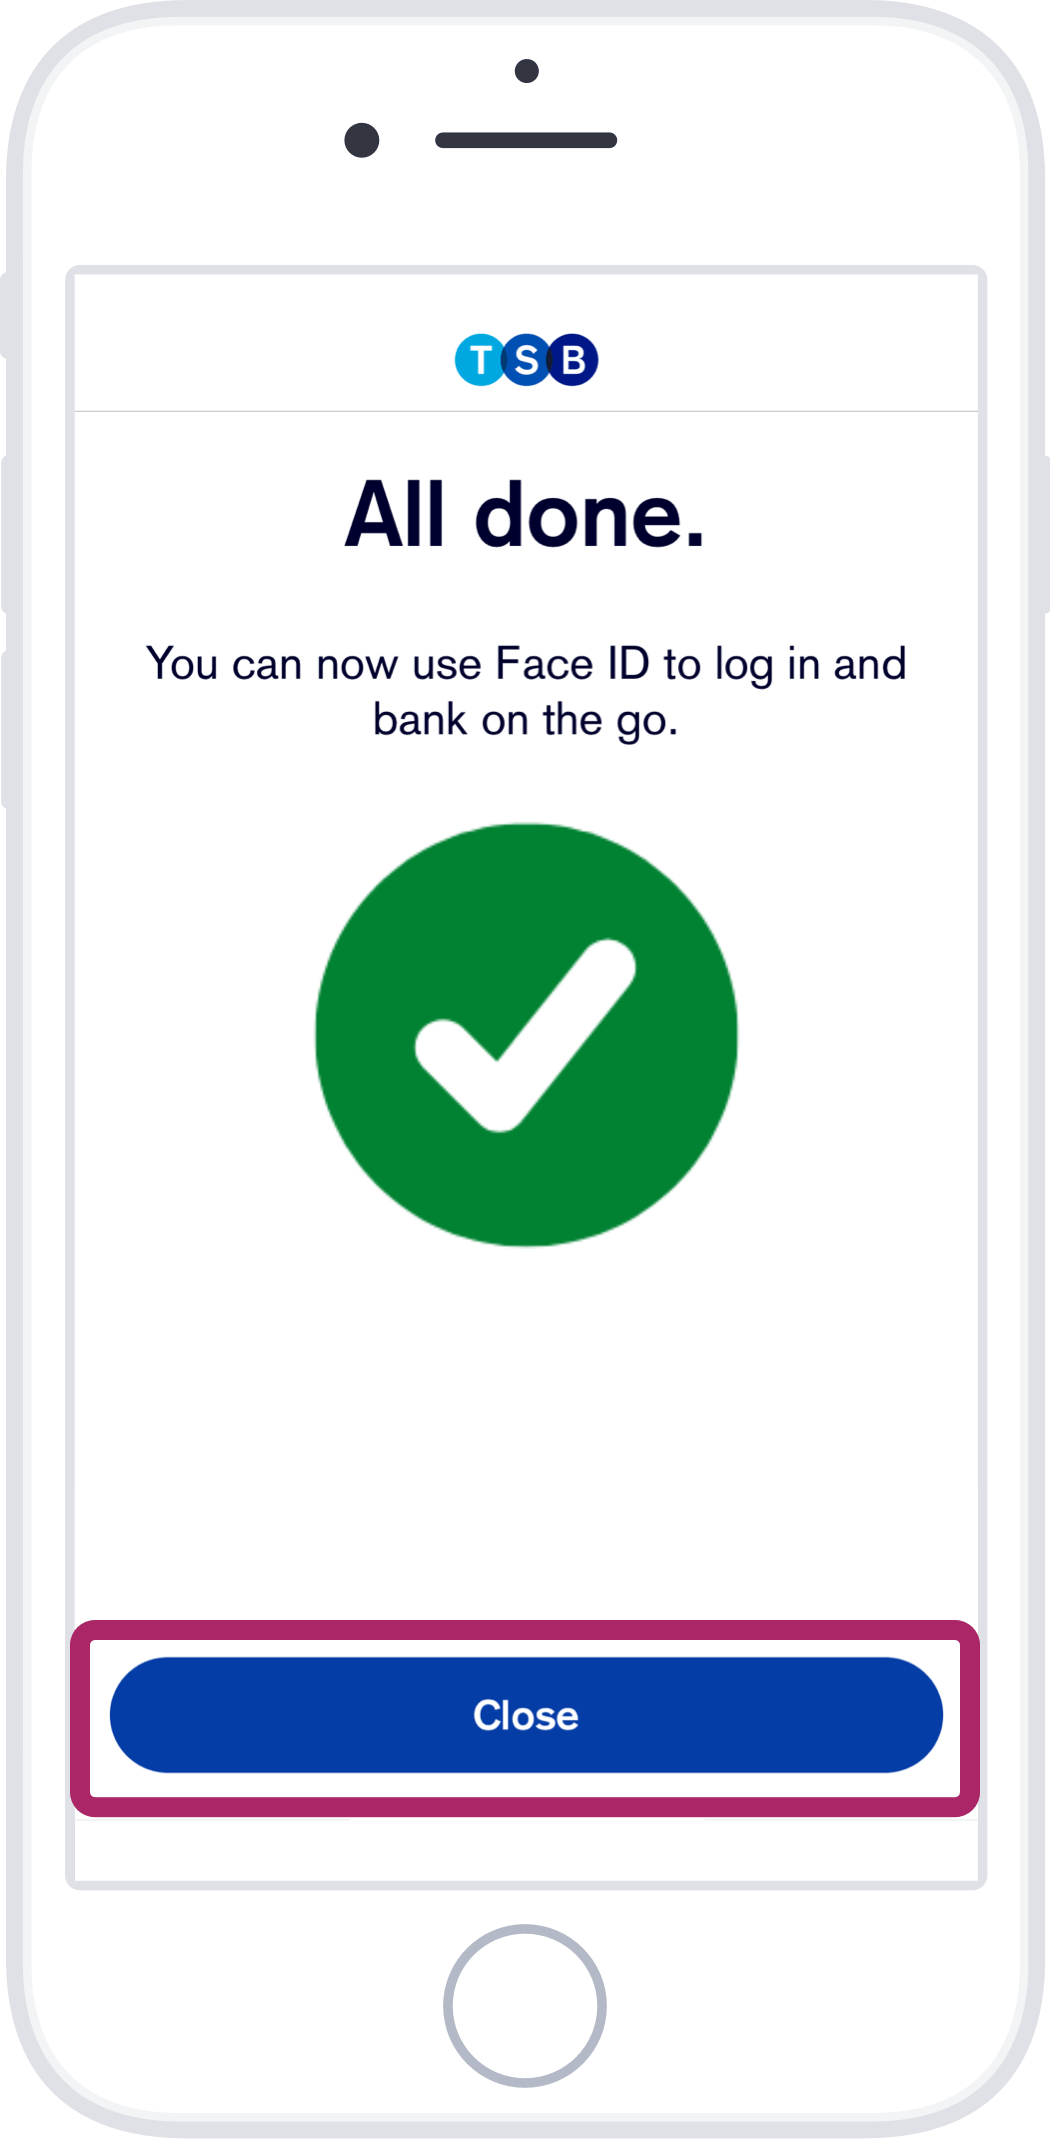 Your Face ID is ready, tap ‘Close’ to exit.